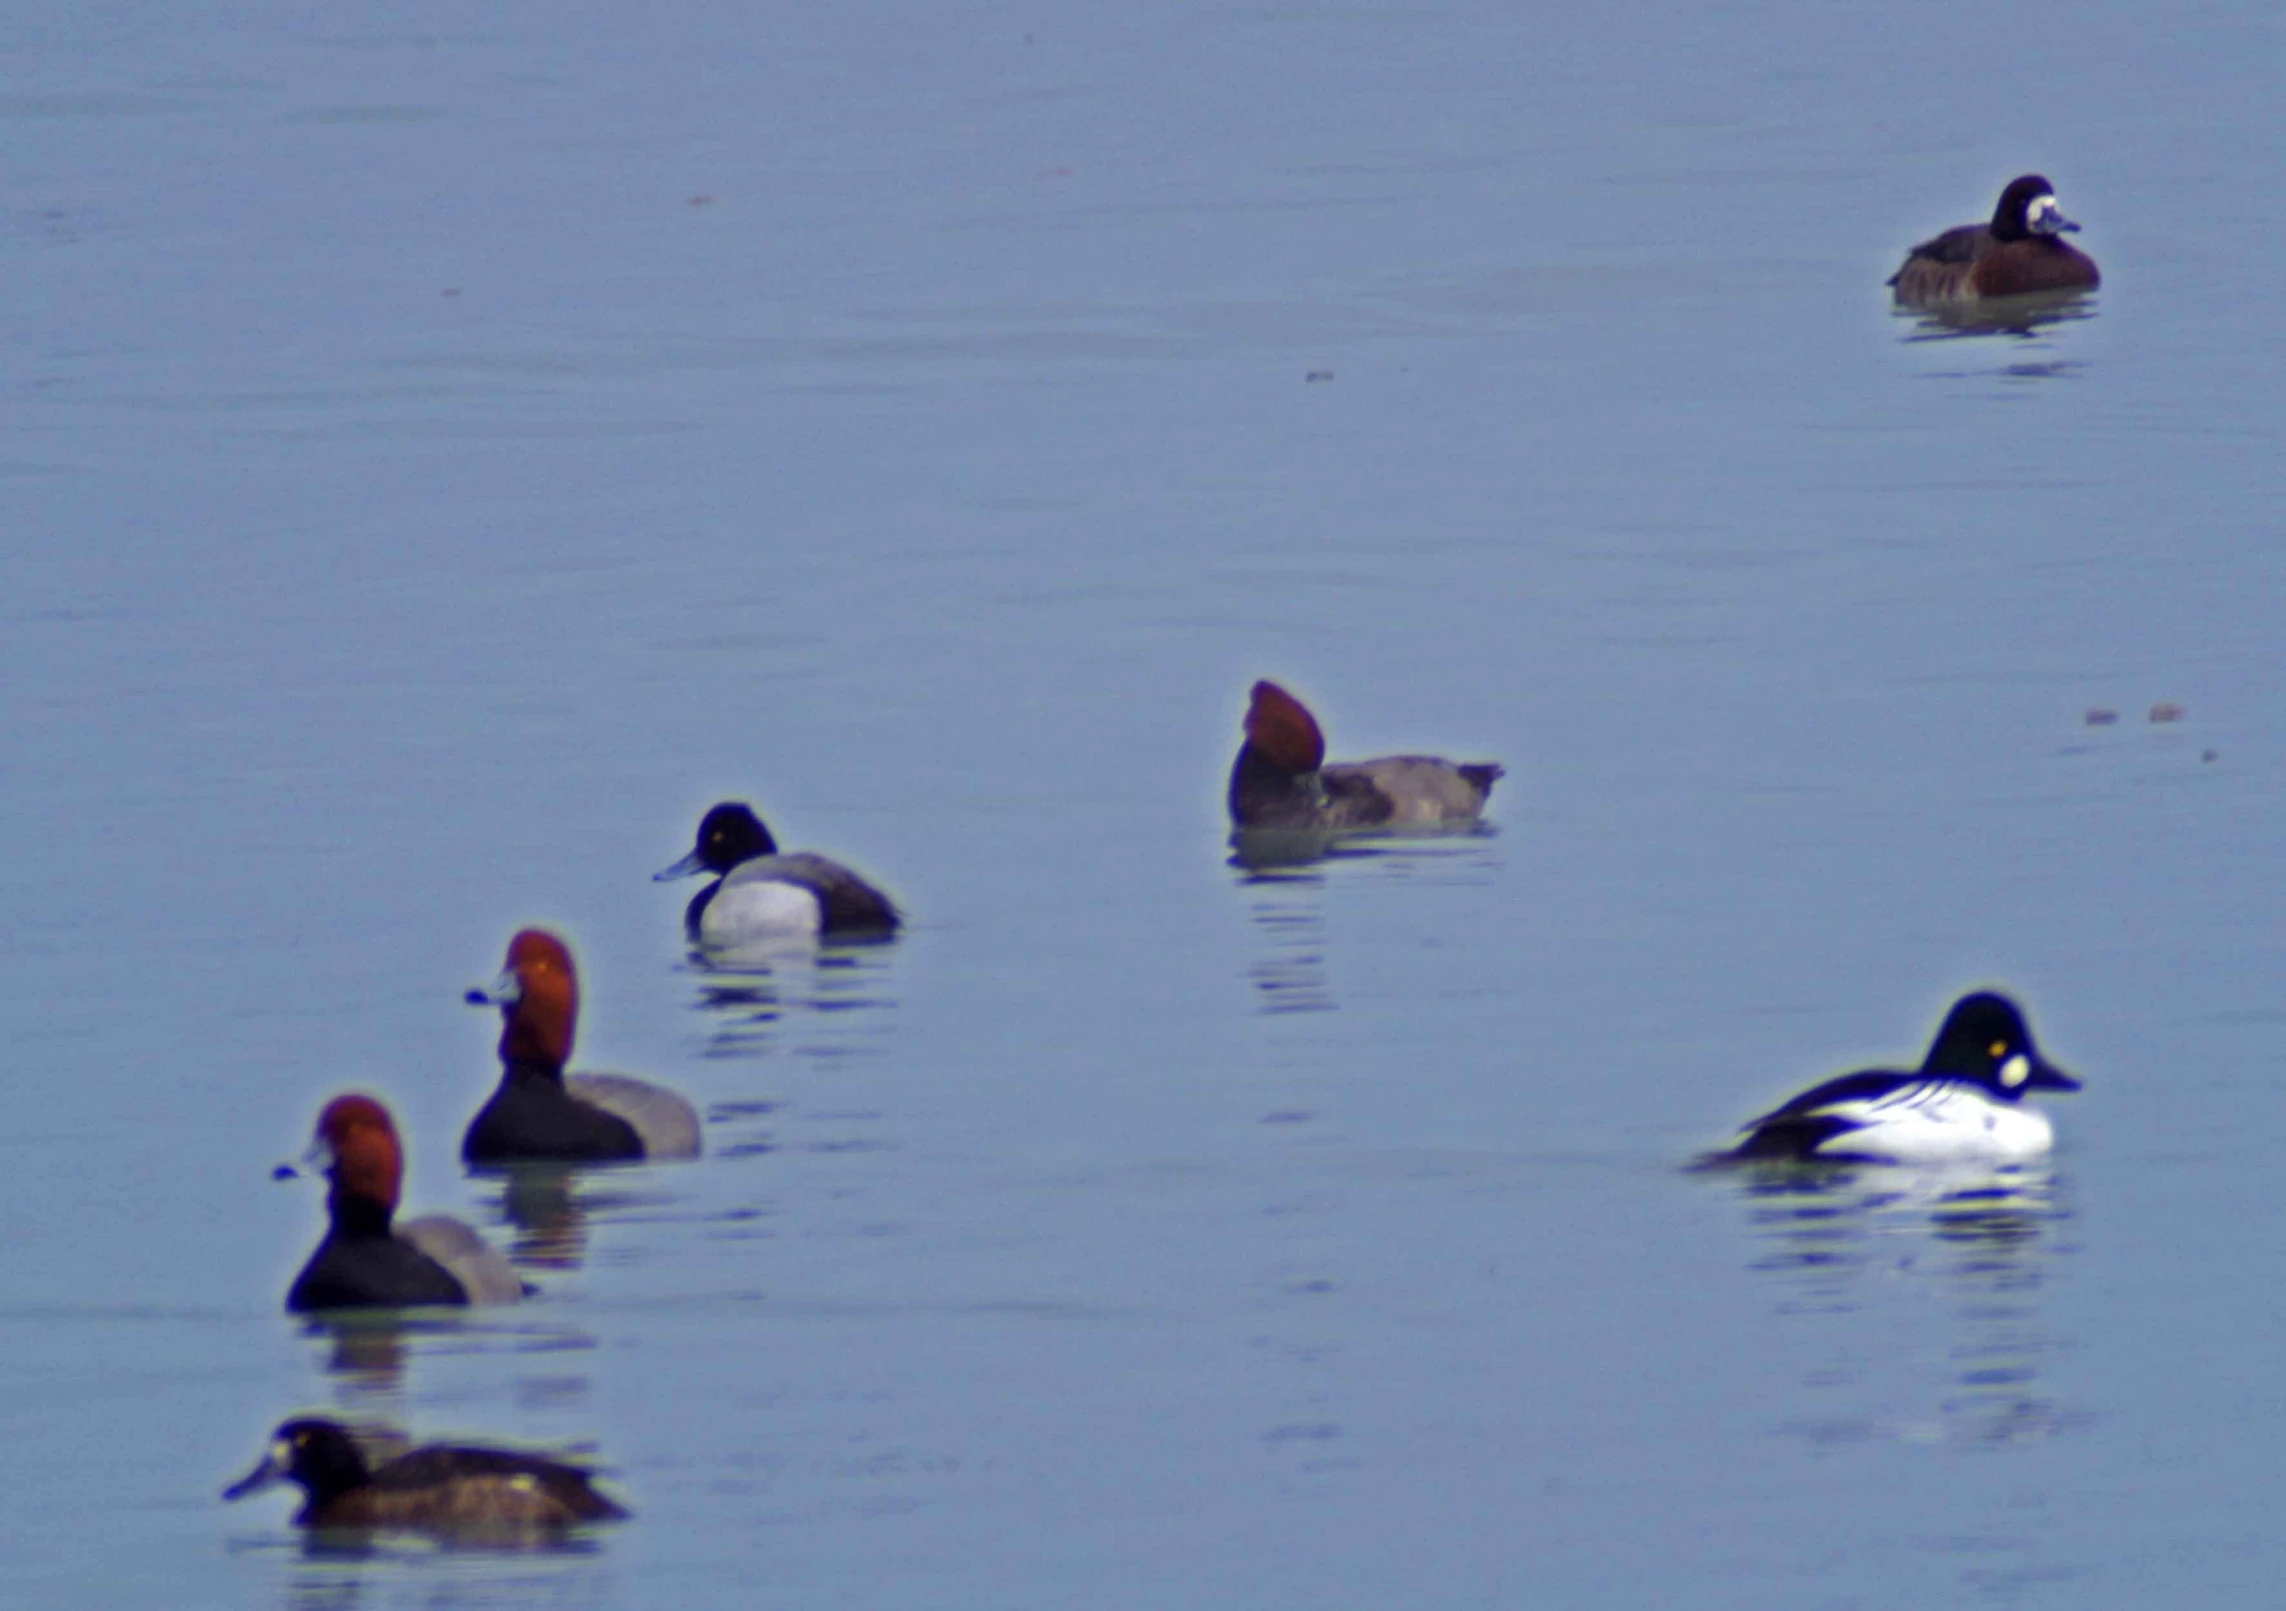 several ducks in a body of water with blue water